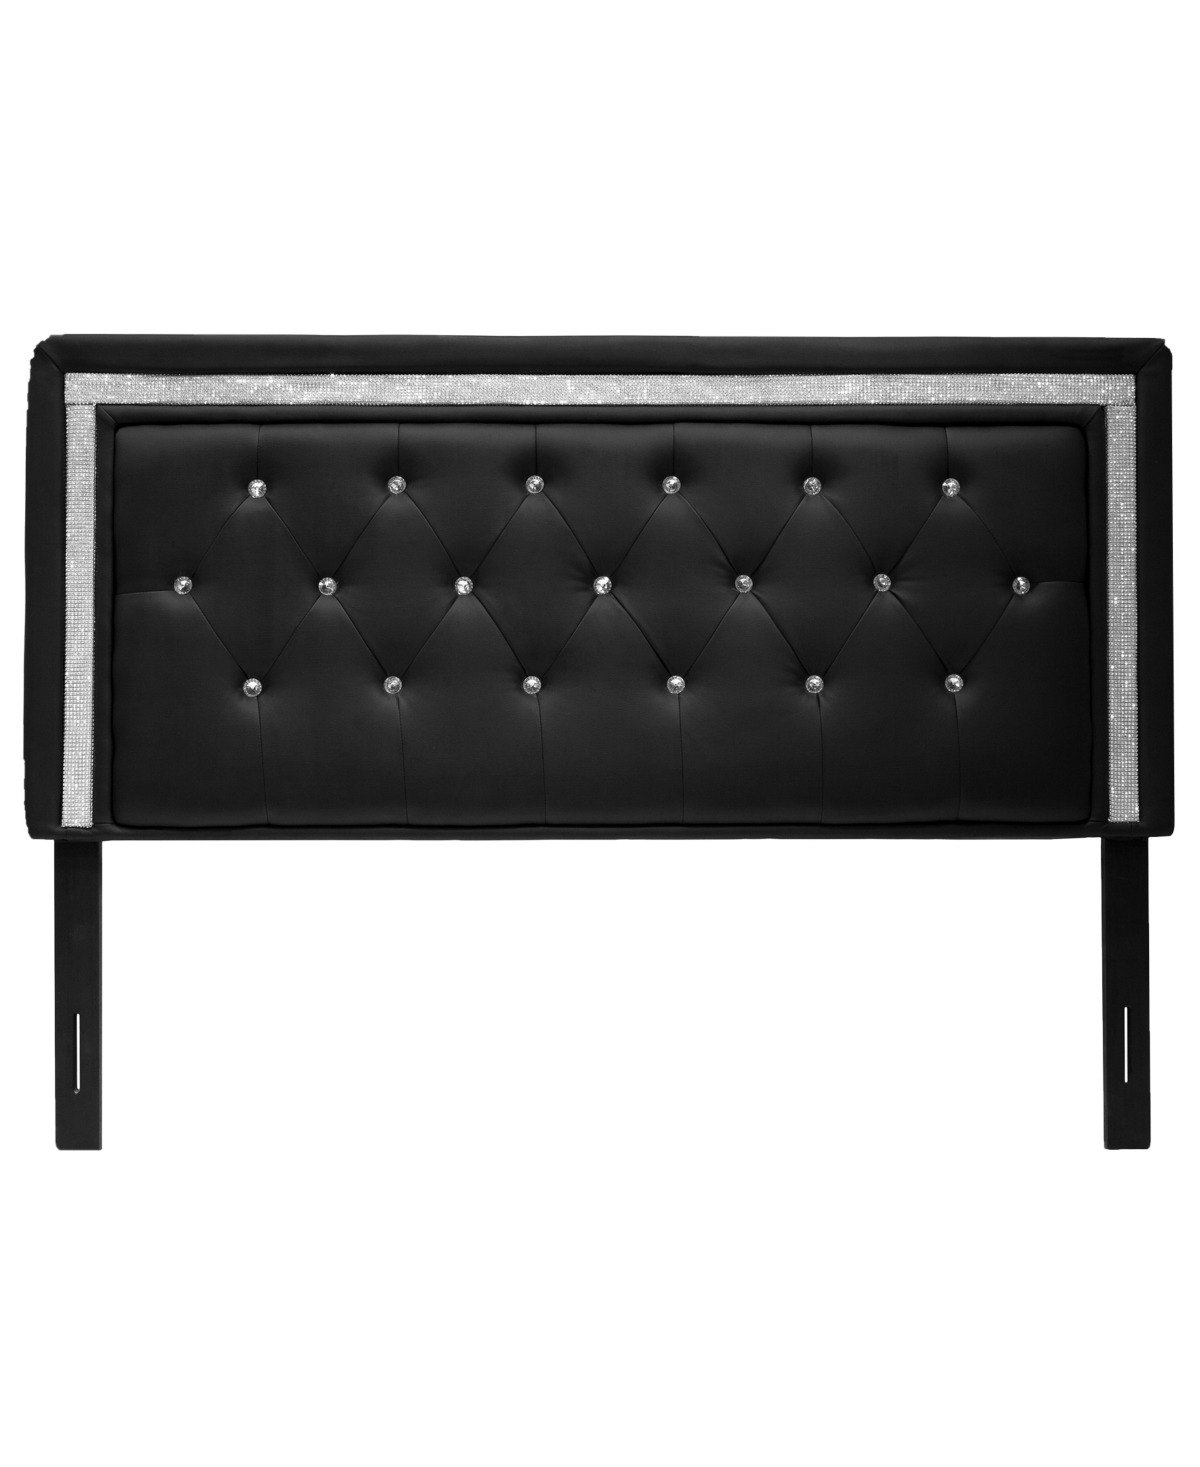 Maria Faux Leather Upholstered Headboard Tufted Crystals Rhinestone Twin